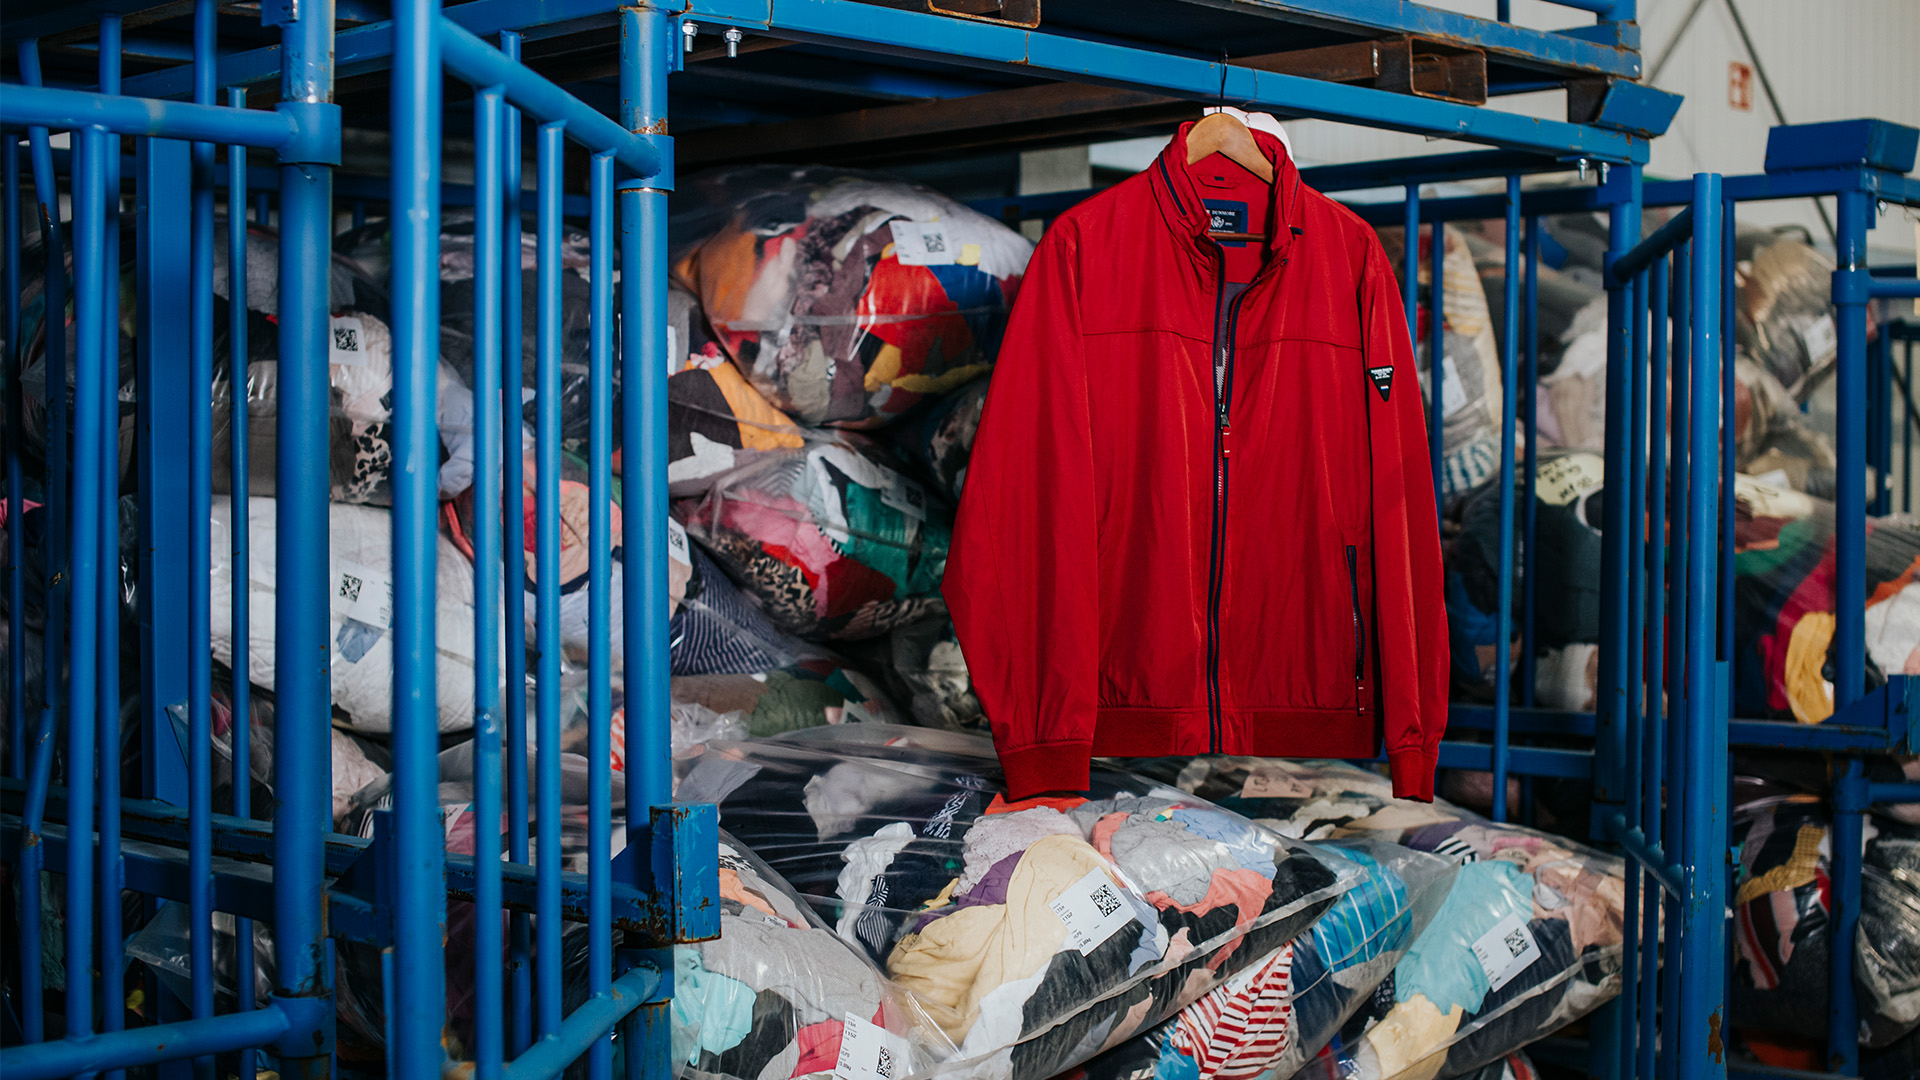 H&M Group and Remondis create joint venture to collect, sort and sell used and unwanted garments and textiles - H&M Group